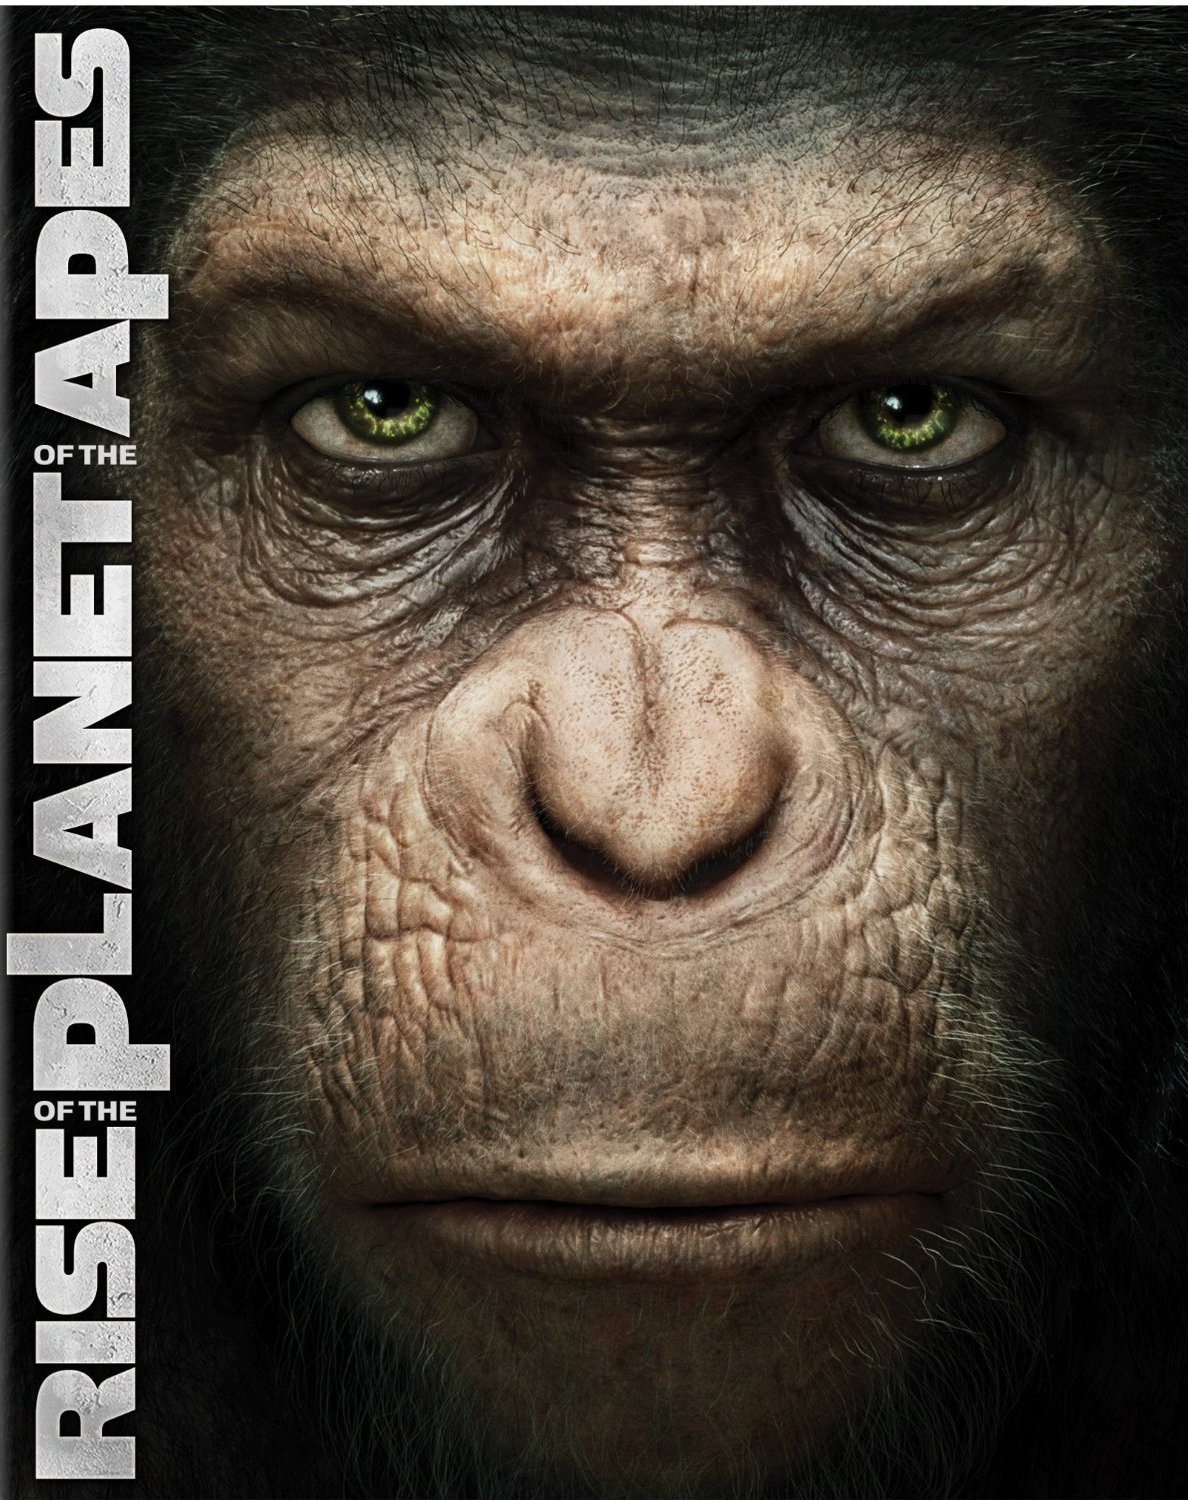 Rise of the Planet of the Apes 2011 - Caesar Speaks